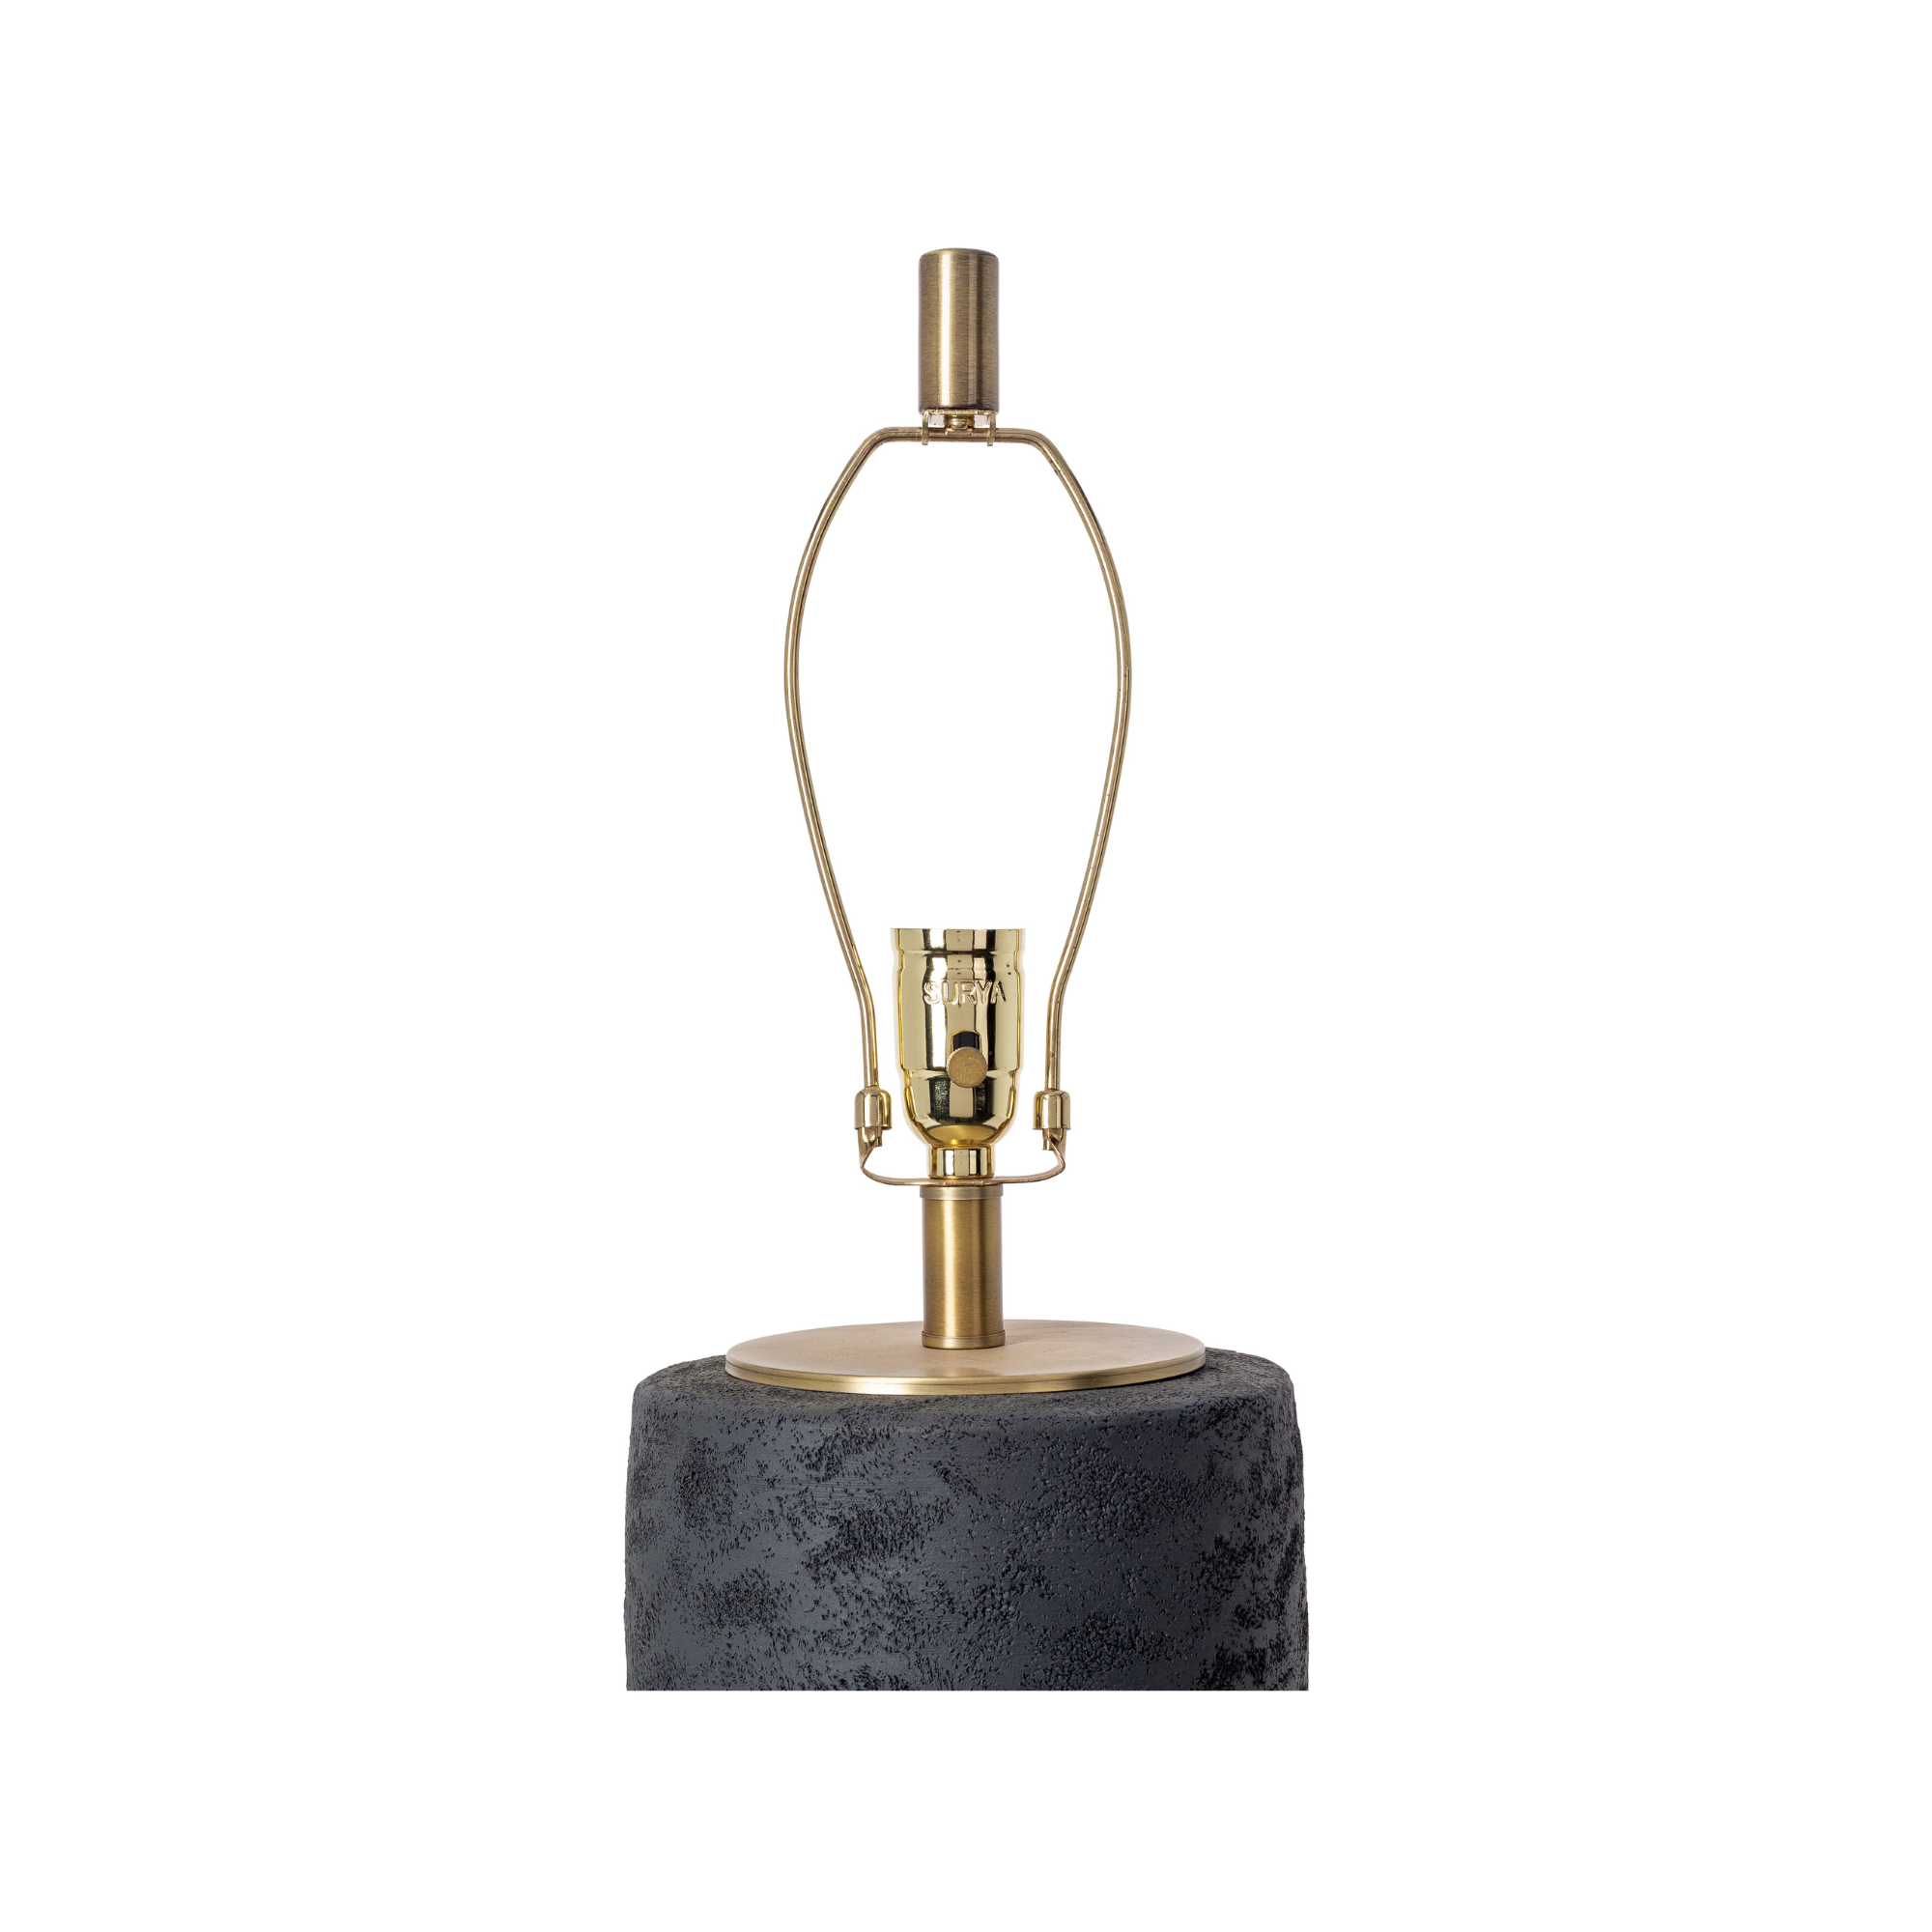 Marcial Table Lamp